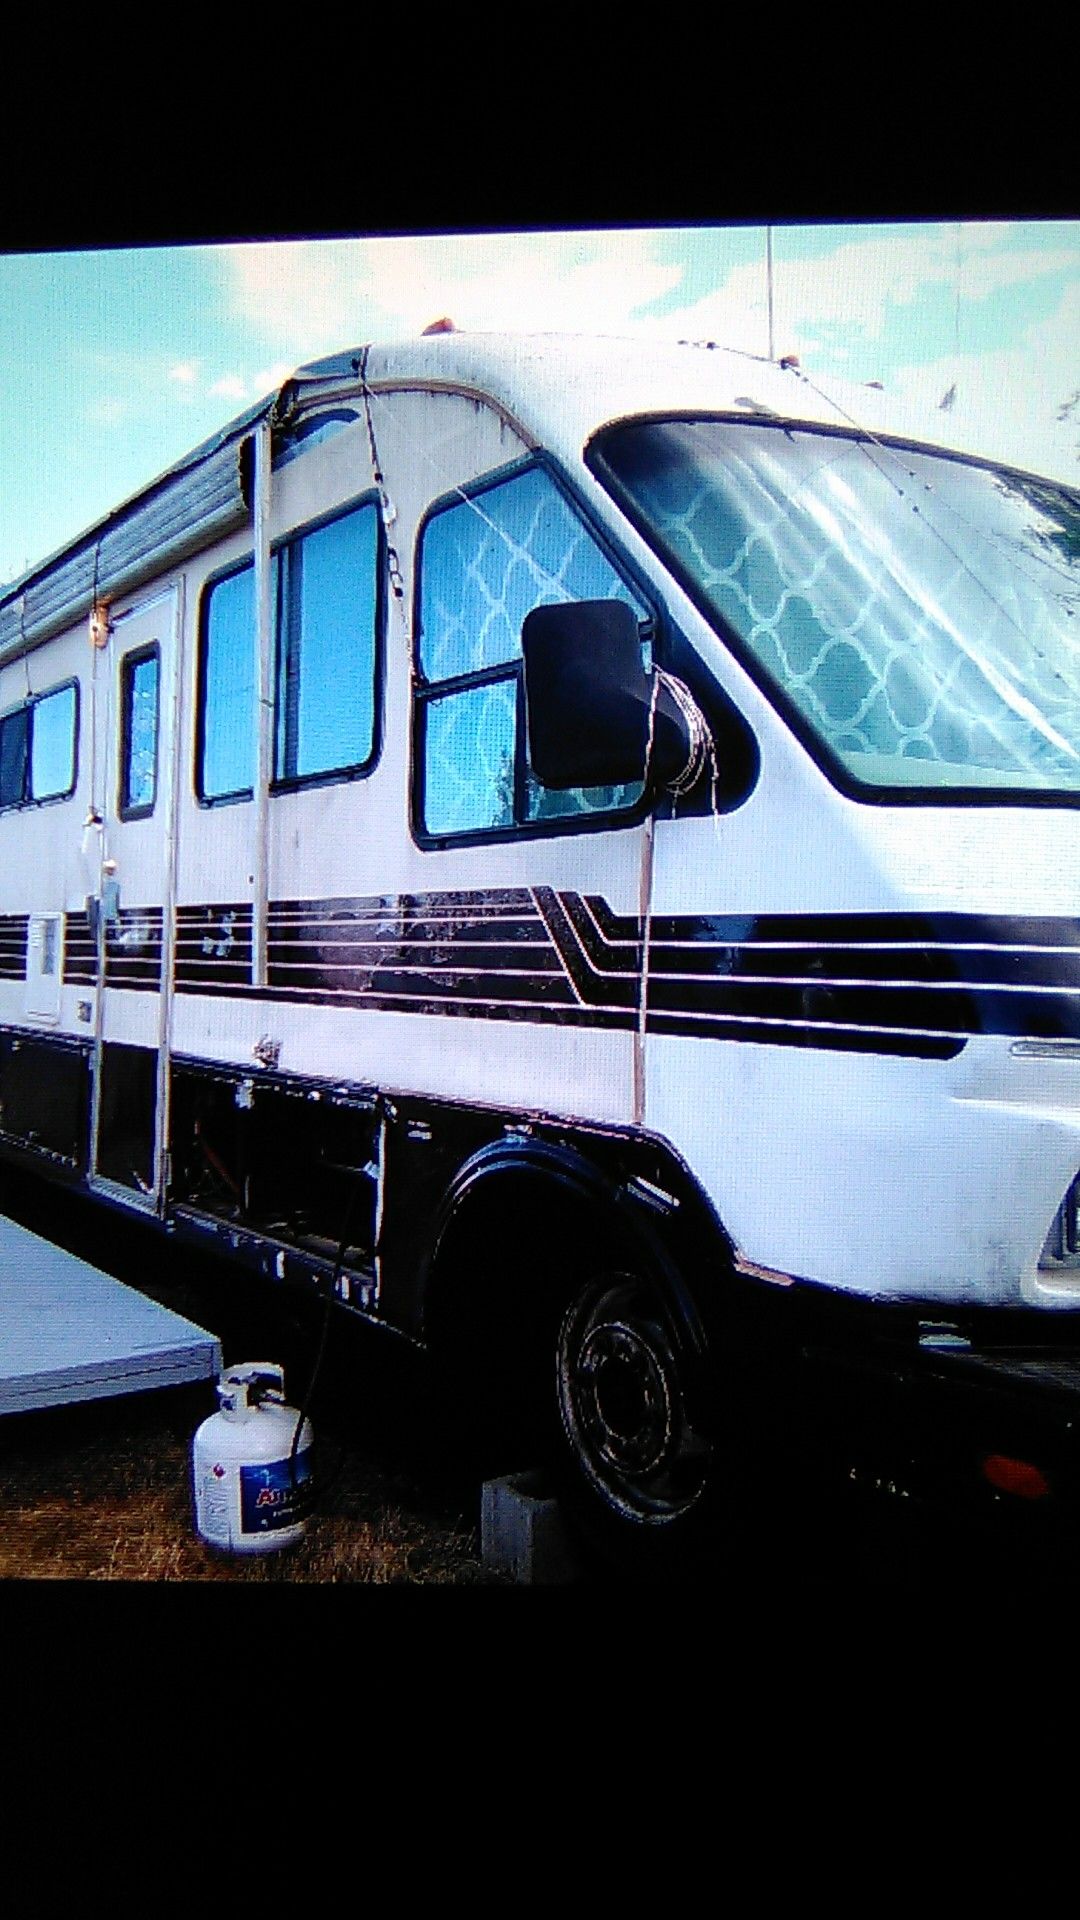 1989 Dolphin motorhome for sale